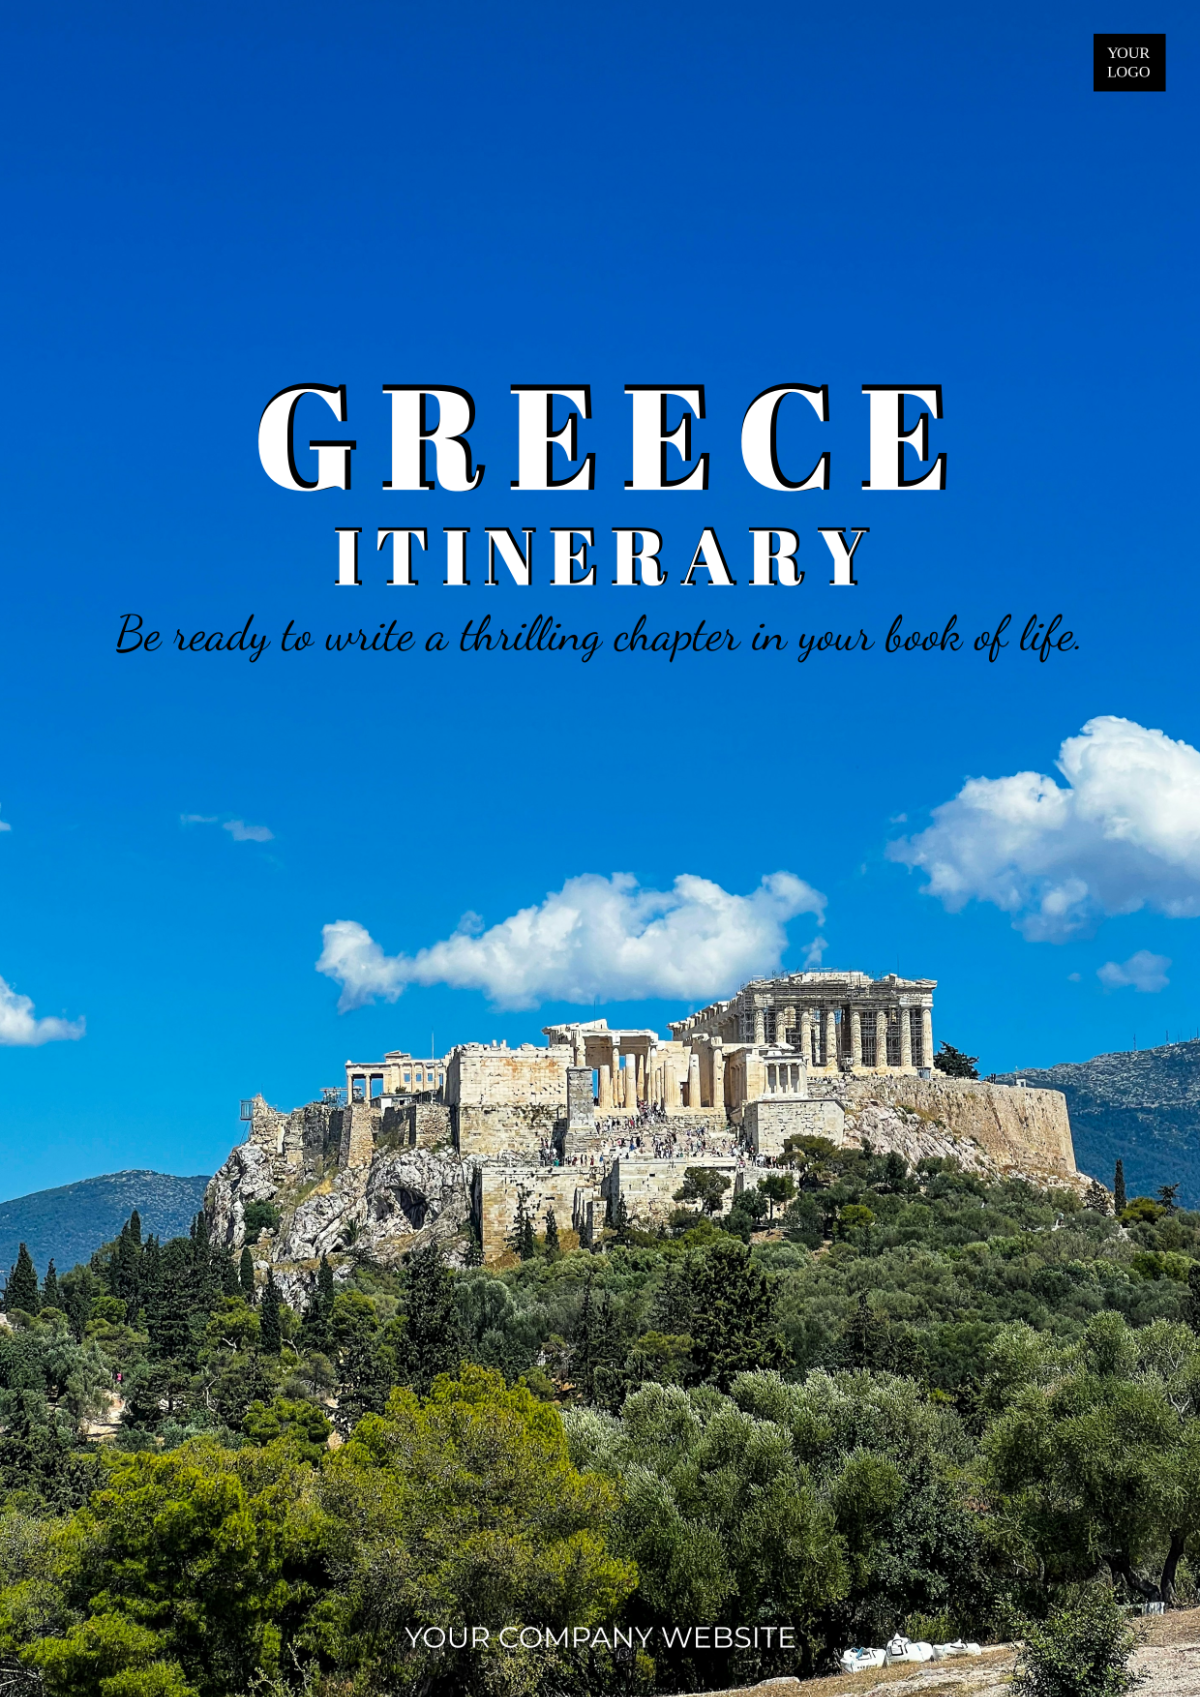 12 Day Greece Itinerary Template